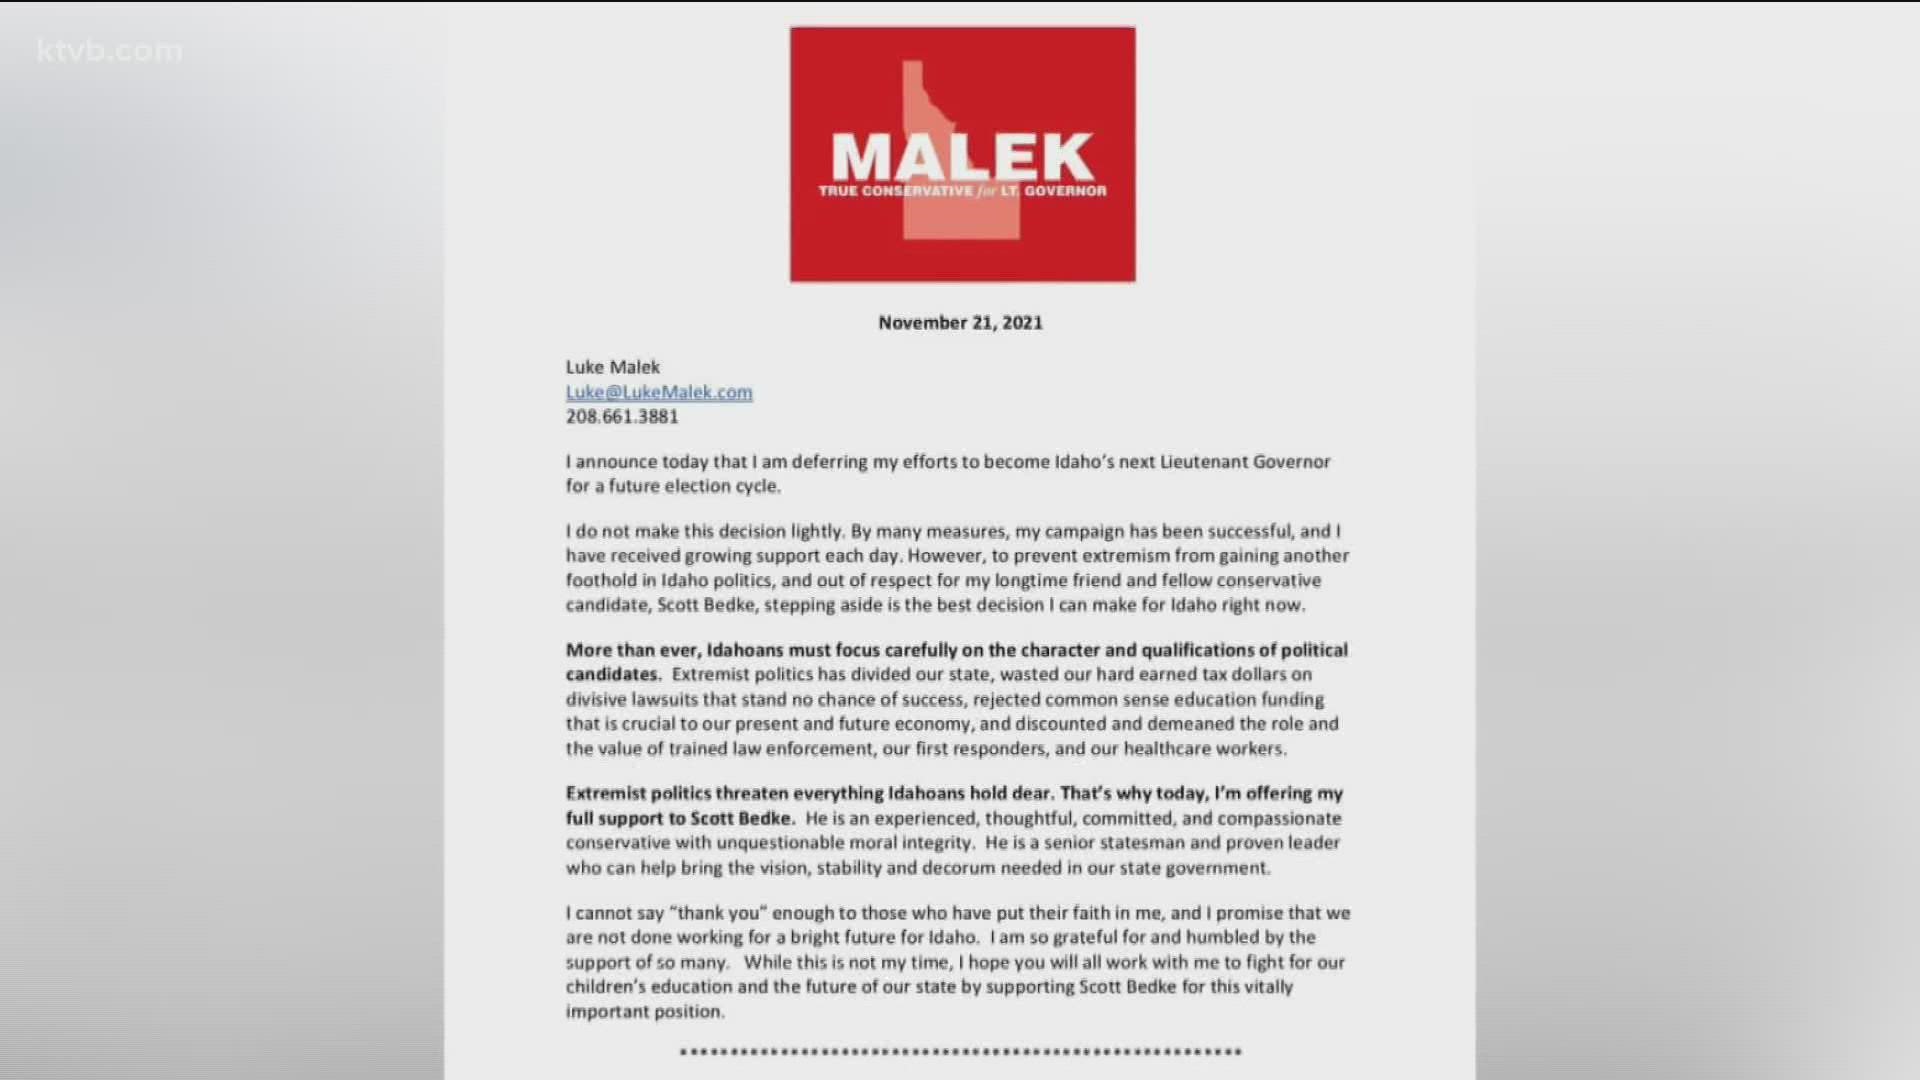 Malek wrote in a letter that he believed backing Bedke was the right decision "to prevent extremism from gaining another foothold in Idaho politics."